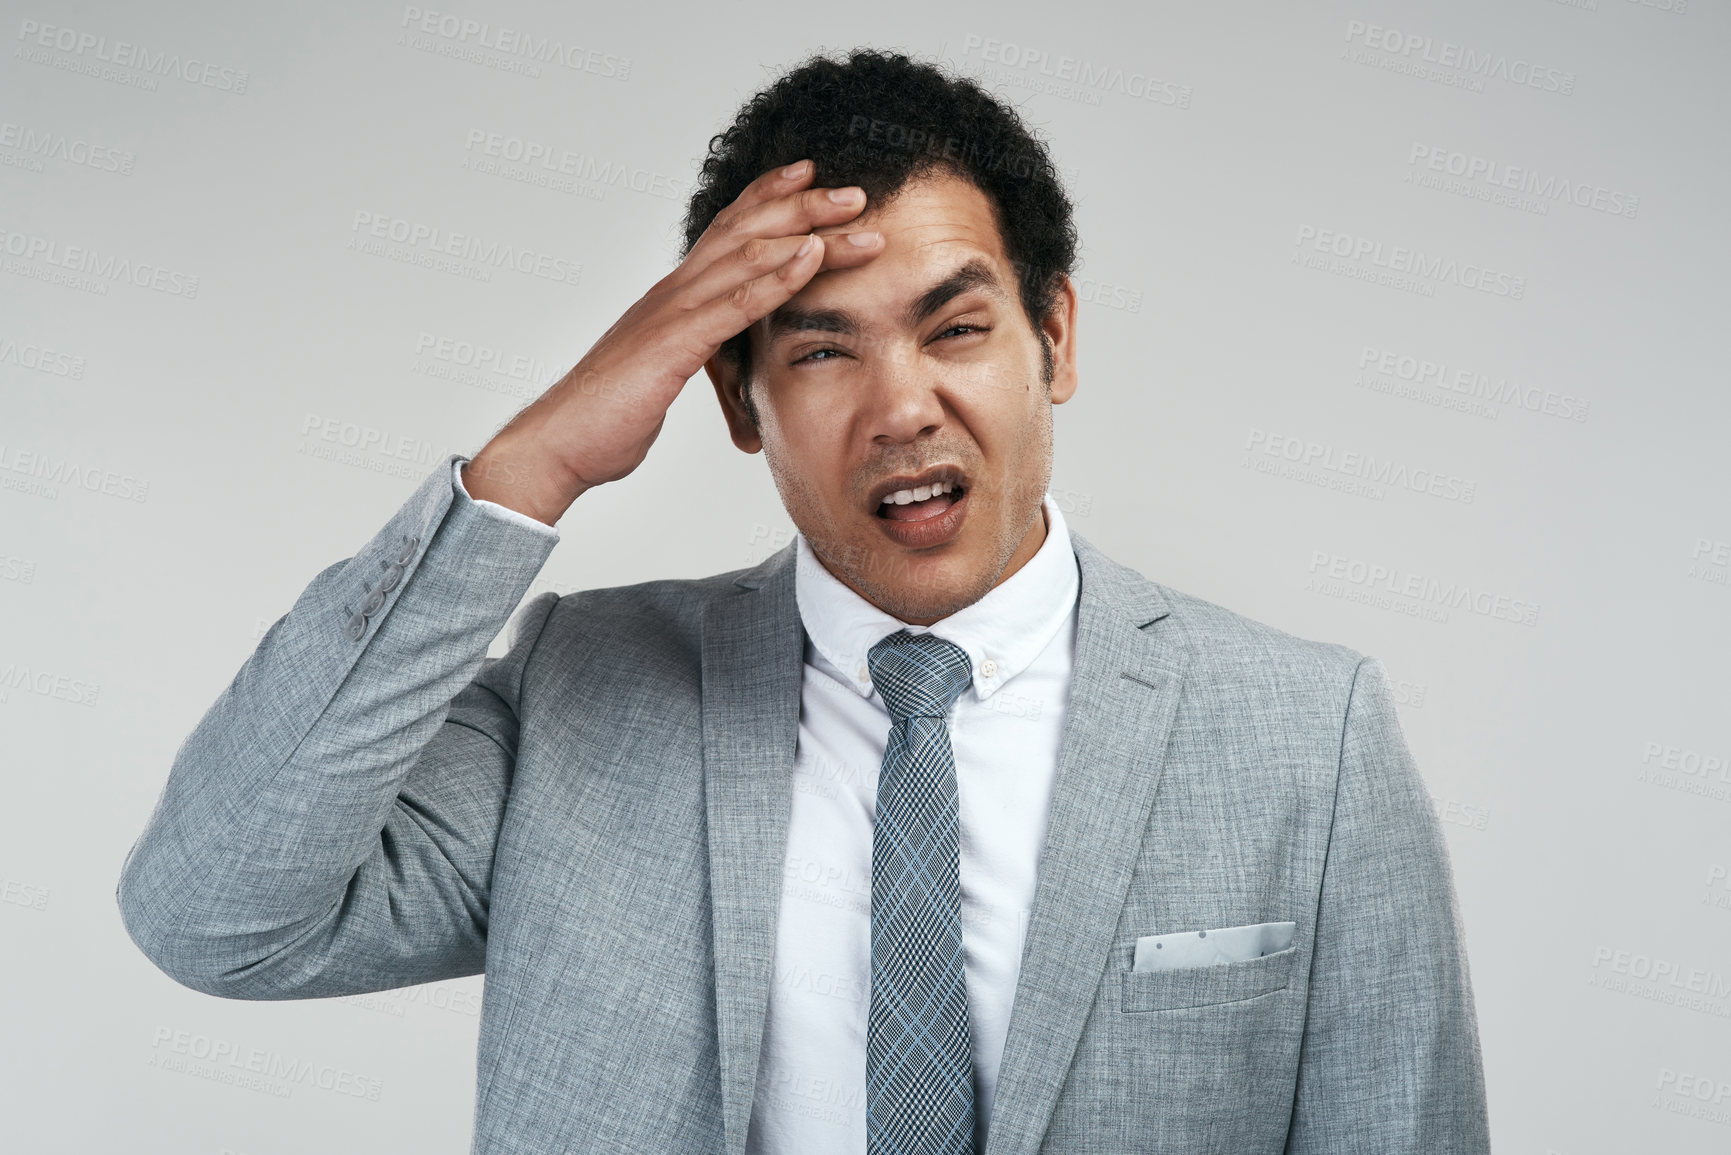 Buy stock photo Studio shot of a businessman looking stressed while standing against a grey background